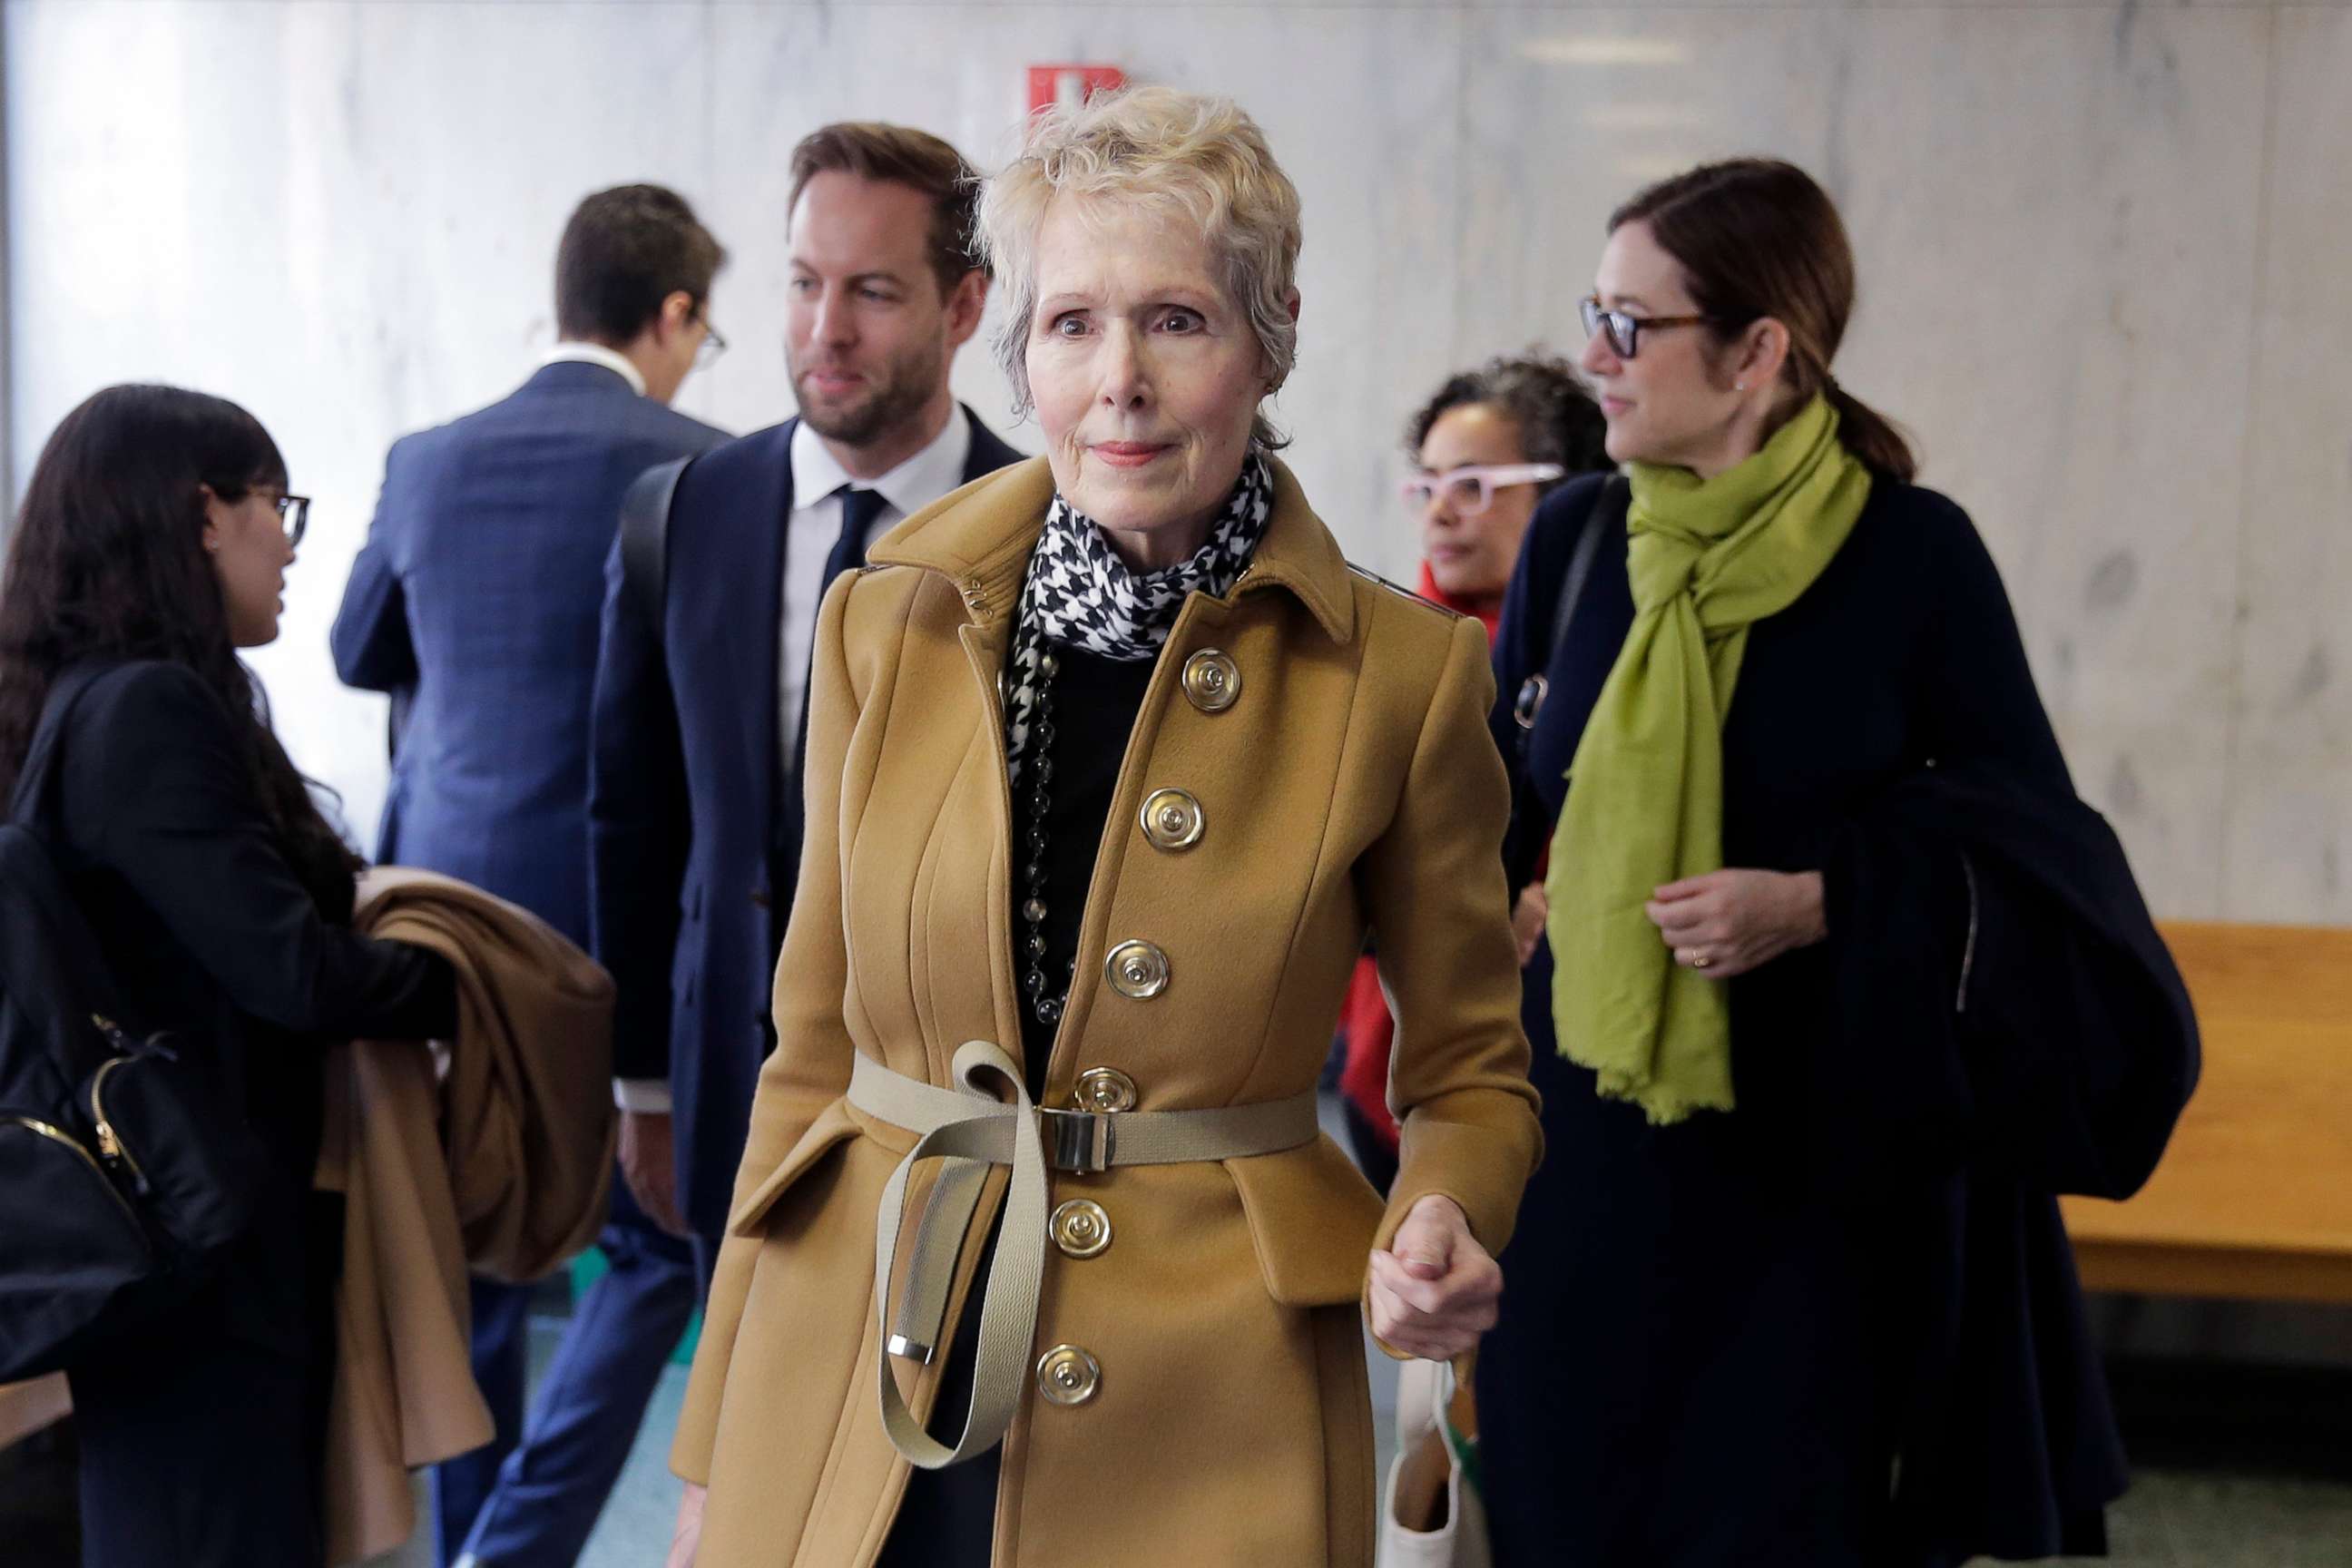 PHOTO: E. Jean Carroll, center, waits to enter a courtroom in New York, March 4, 2020.